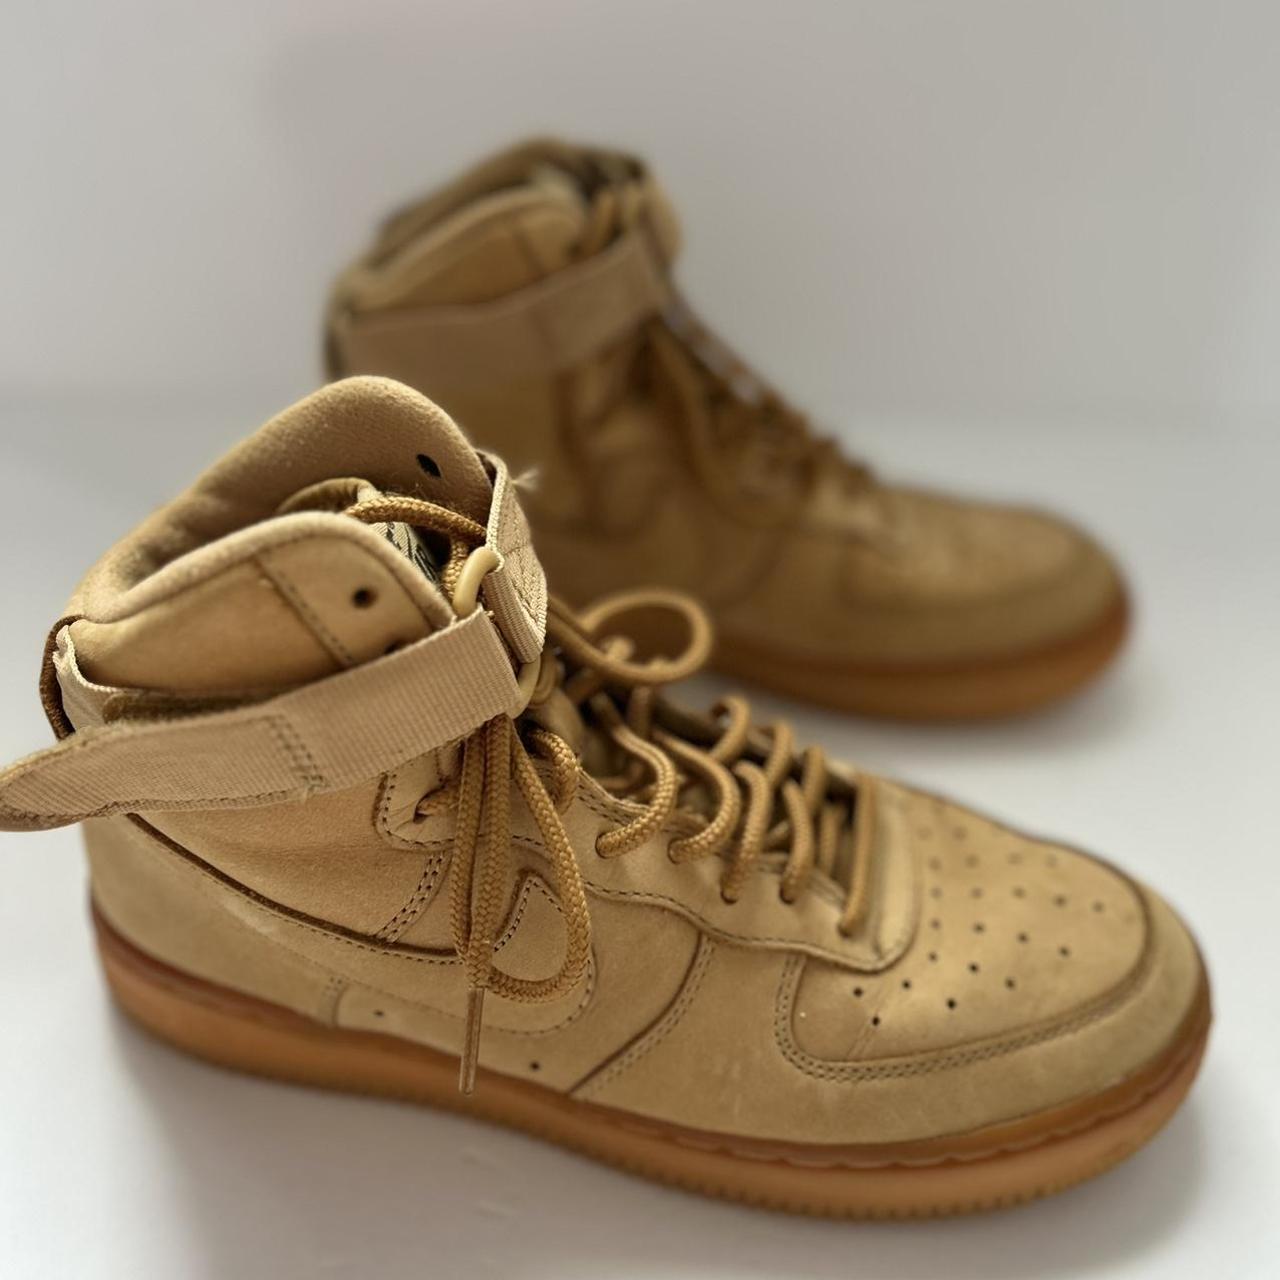 Nike Air Force 1 High LV8 3 Shoes in Wheat/Gum Light - Depop